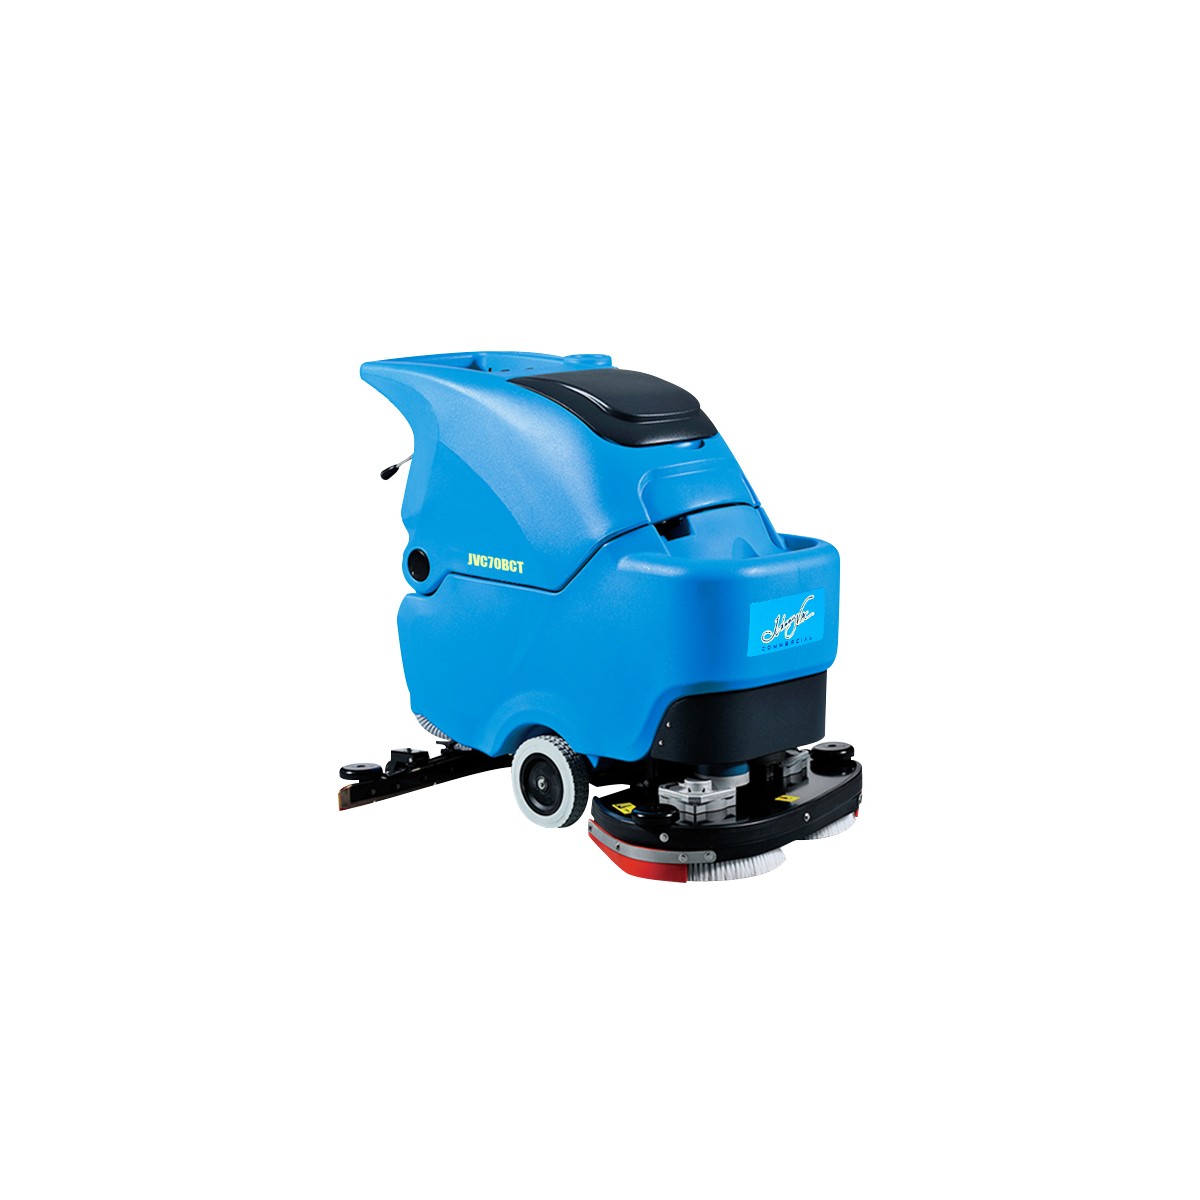 JVC70BCT - 28" Autoscrubber With Traction